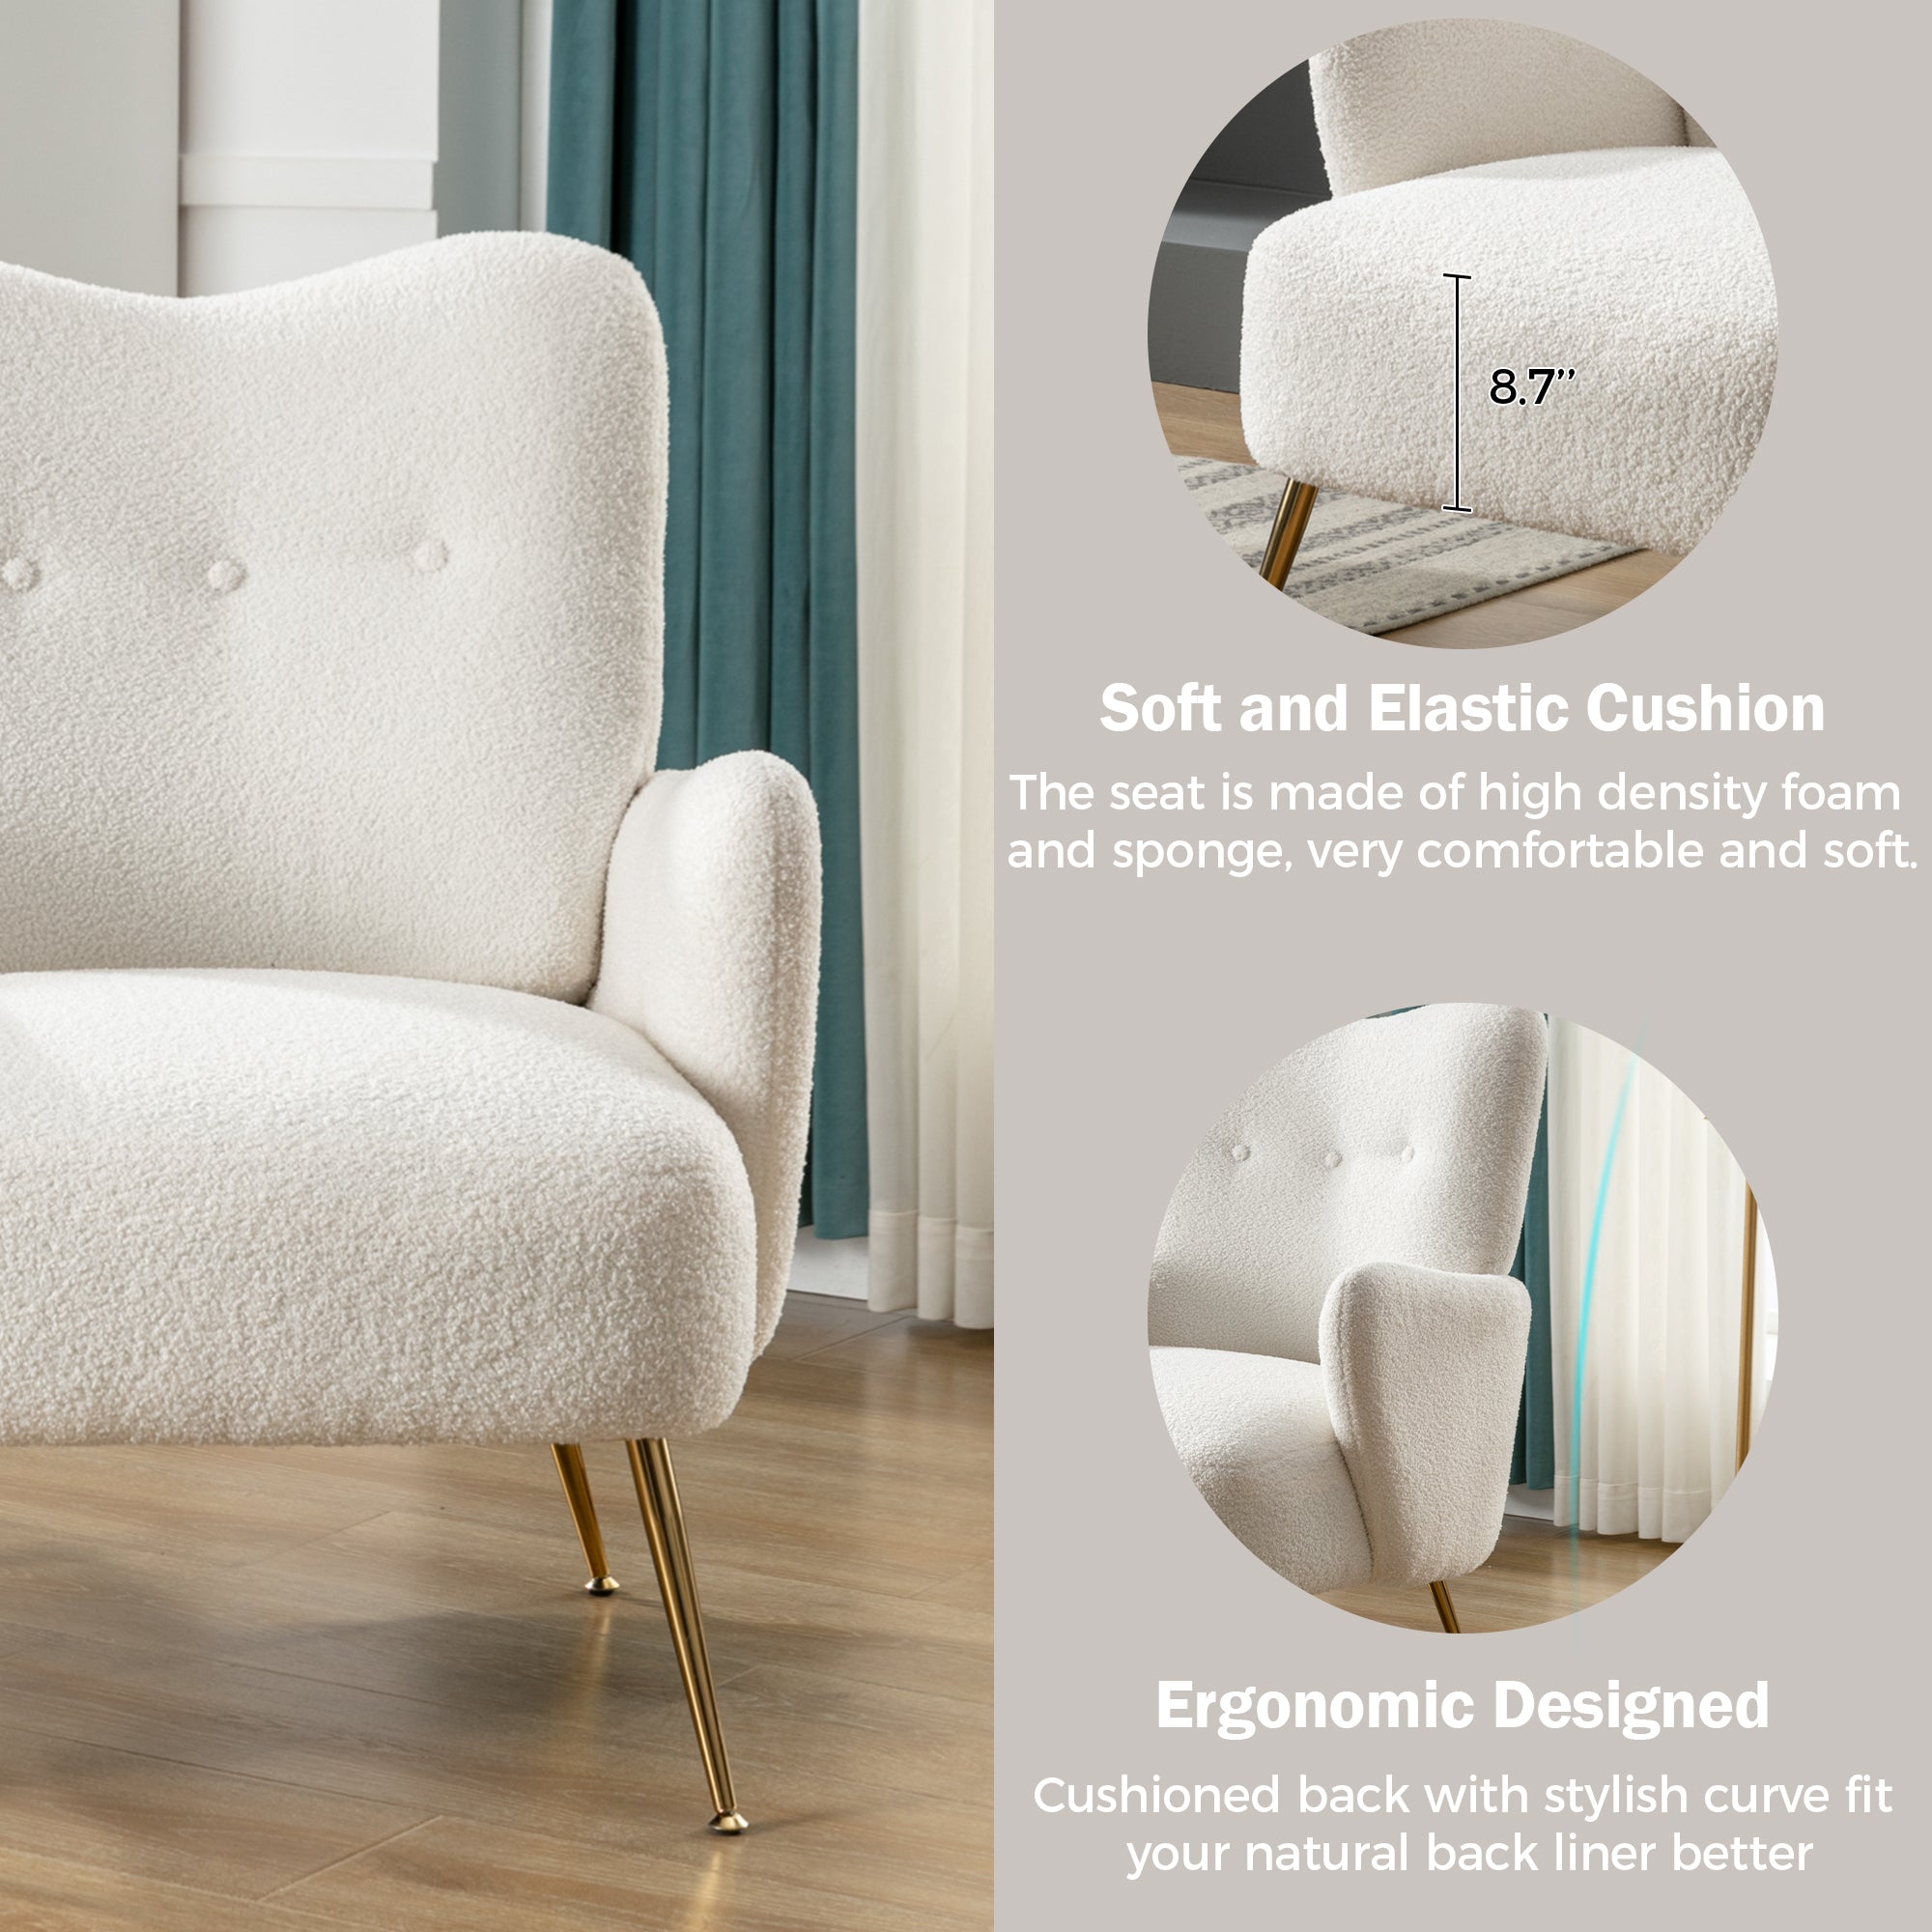 Modern Teddy Short Plush Particle Armchair, Accent Chair with Golden Metal Legs and High Back - White